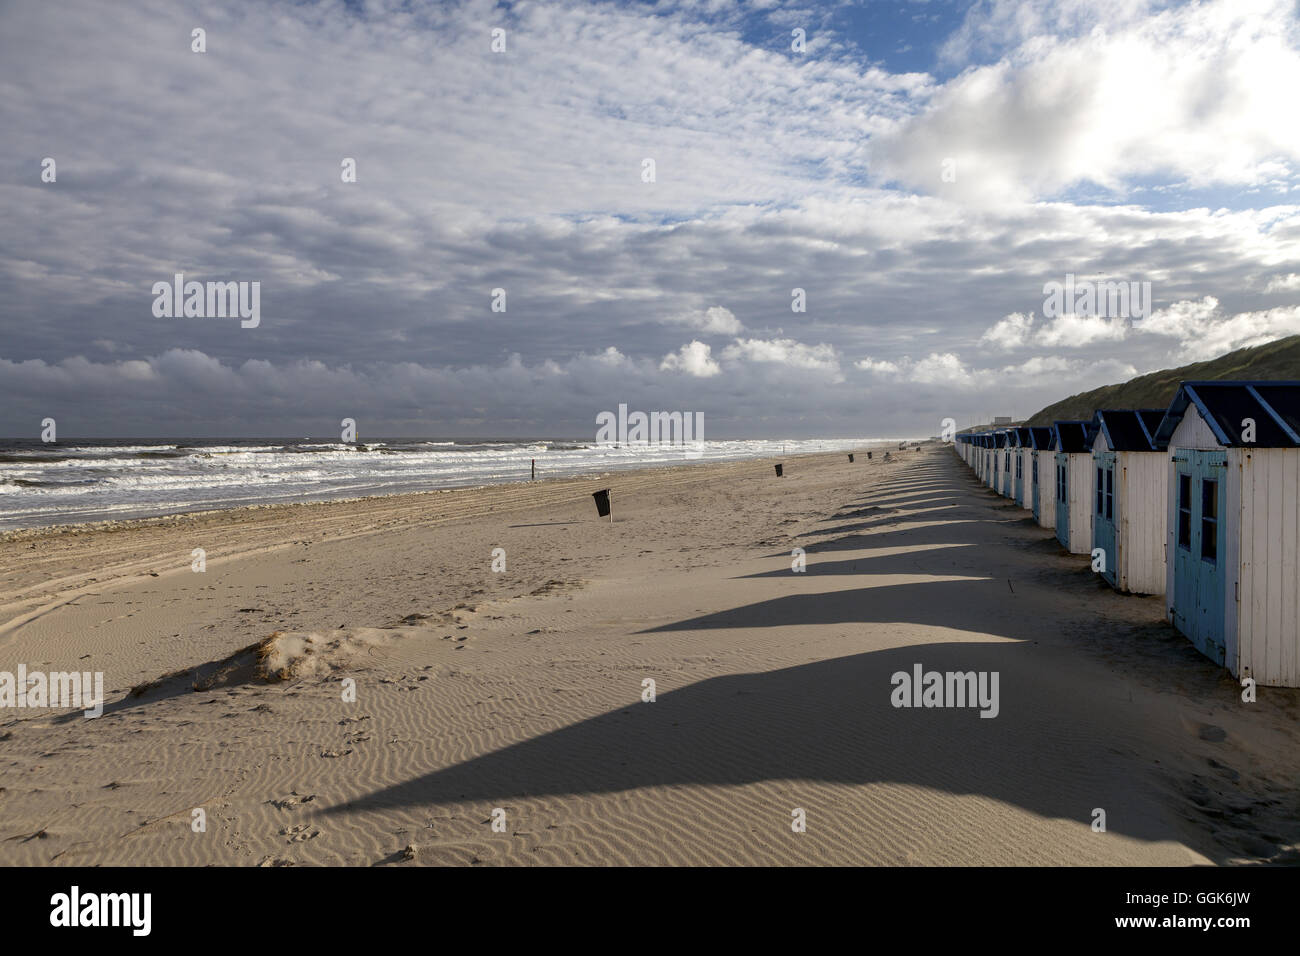 Beach huts on the North Sea, Texel Island, The Netherlands Stock Photo